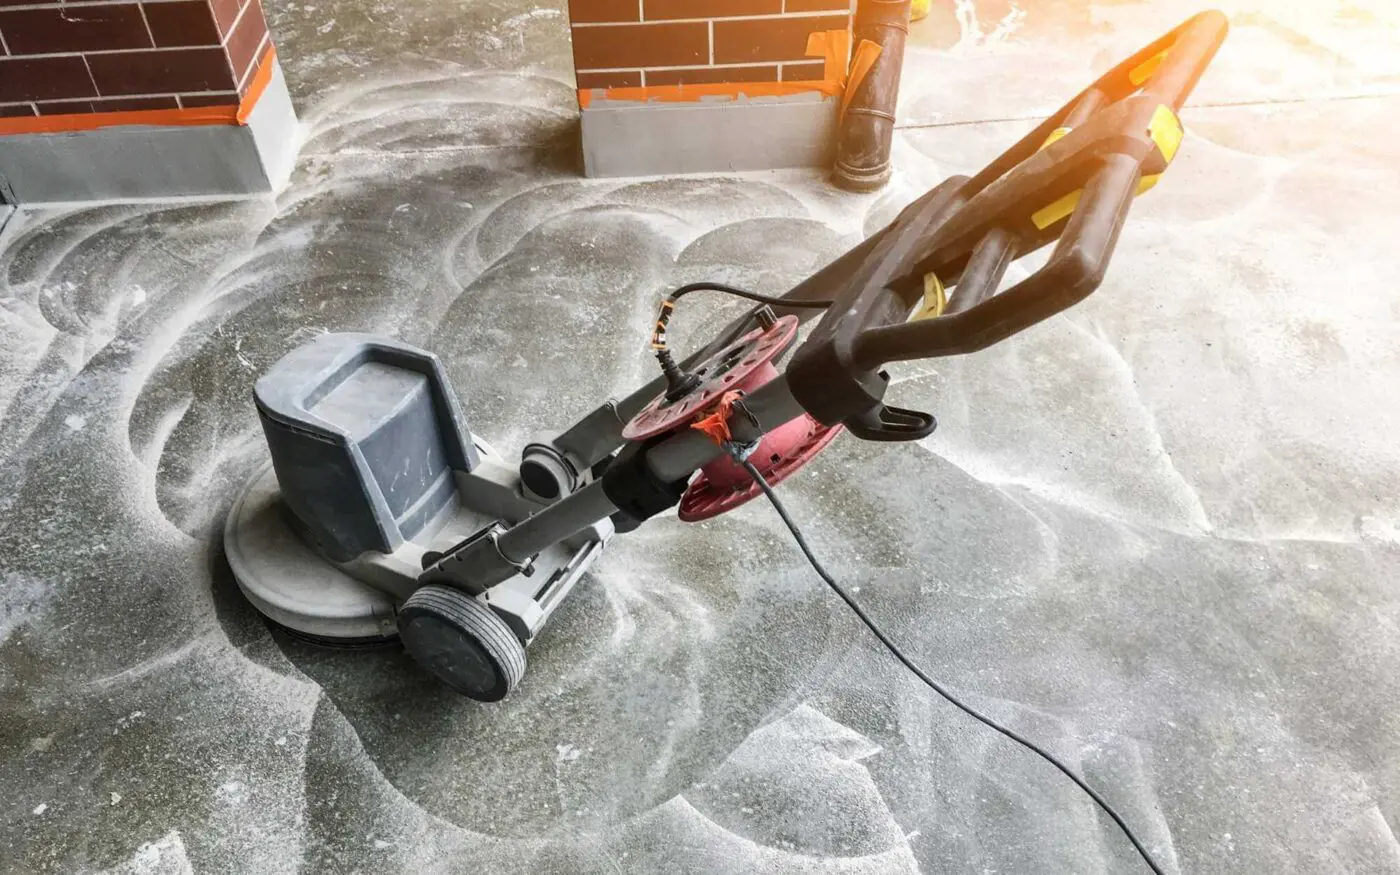 A floor cleaning machine is being used on a concrete floor, leaving circular cleaning patterns. The machine has a grey body and black handle, with wires extending from it. The background shows brick walls and sunlight filtering through. For professional results like this in Gardnerville NV, contact our concrete contractors for a free quote.